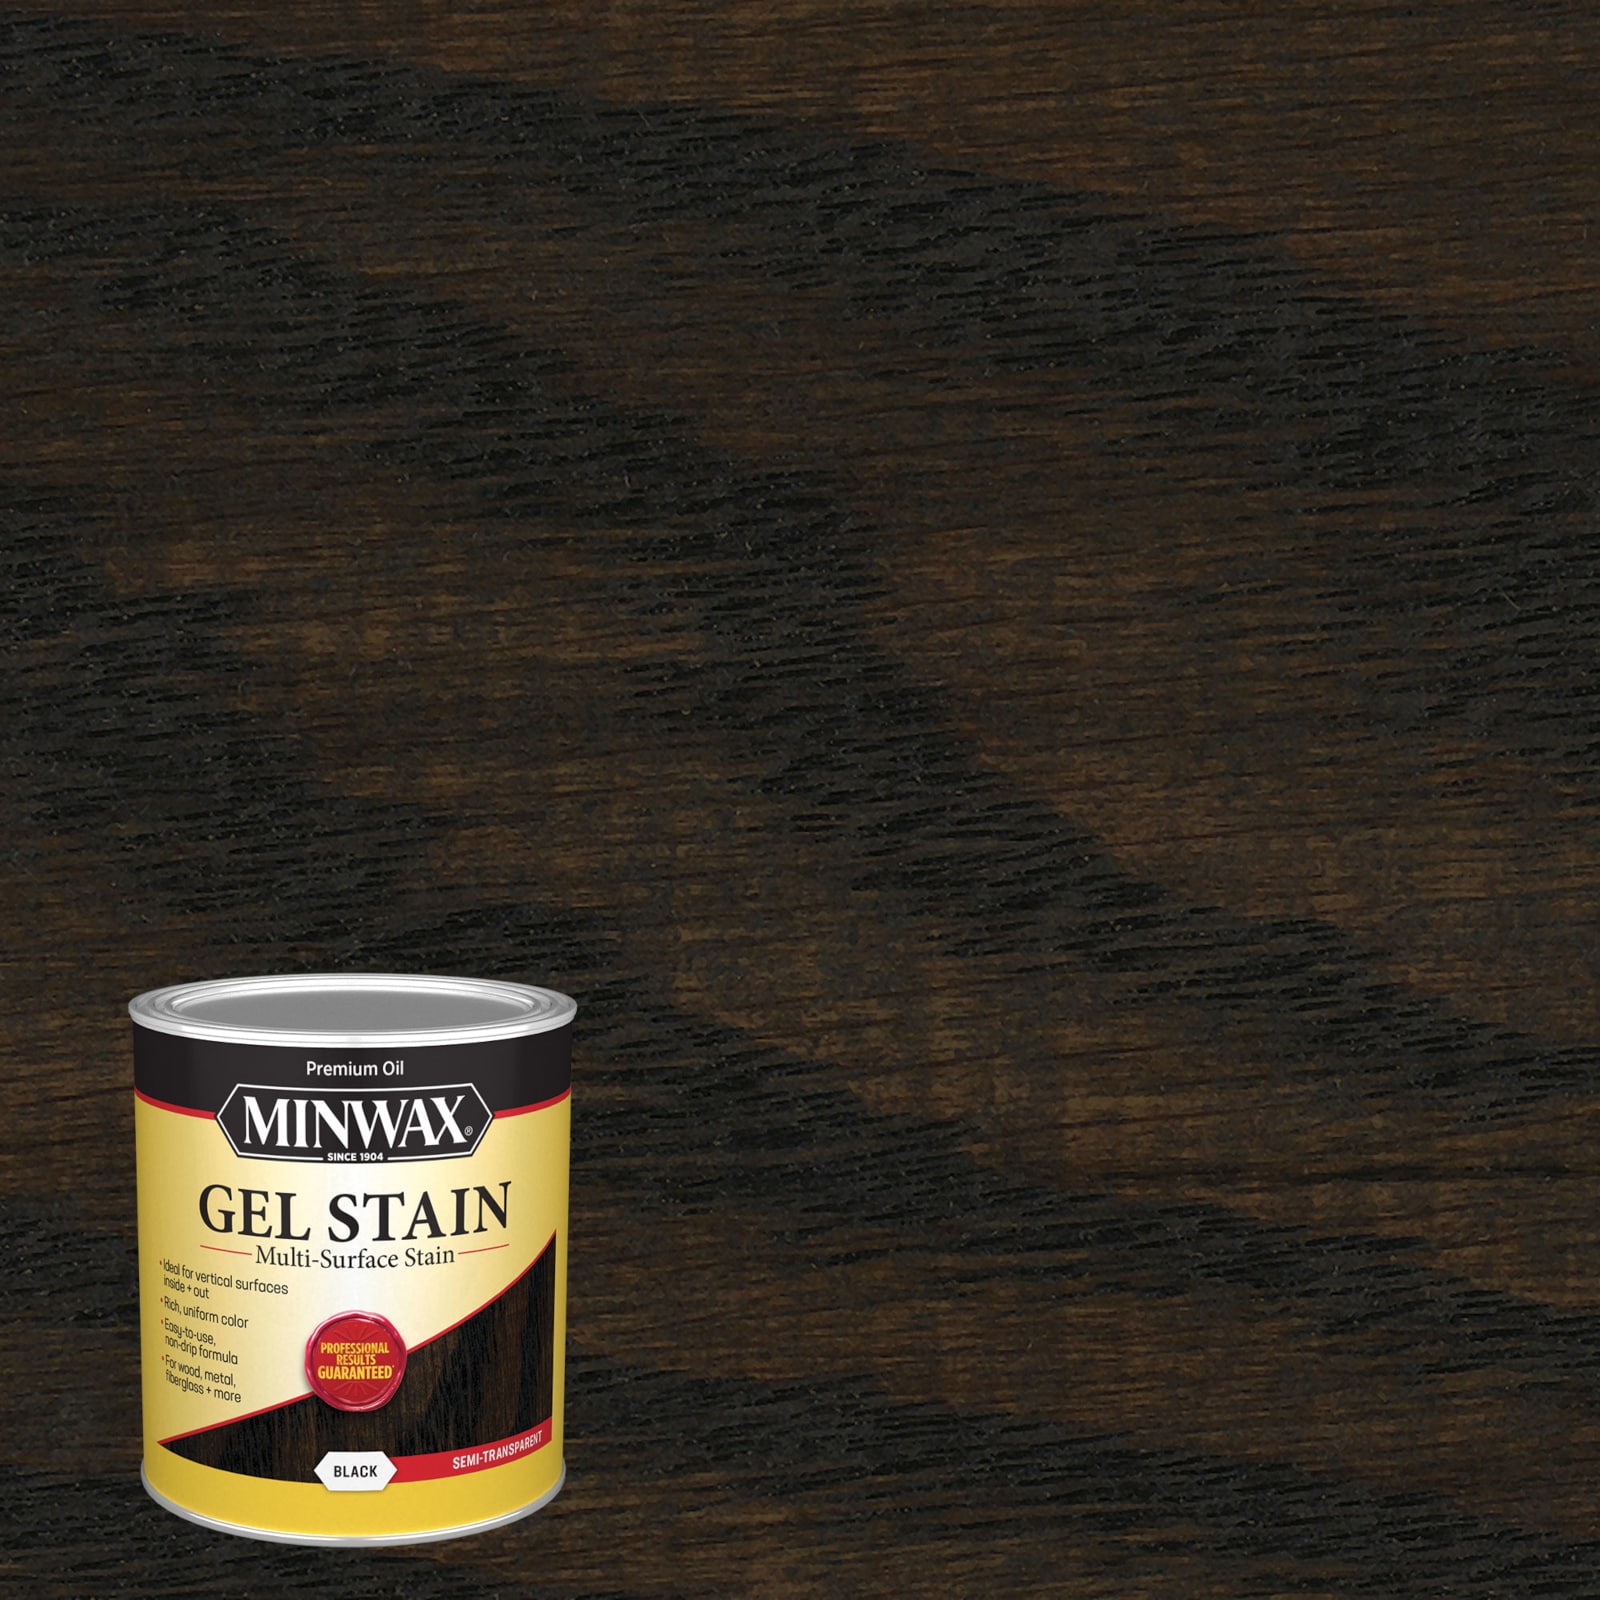 Best Gel Stain For Wood And Fibreglass: Top Picks!